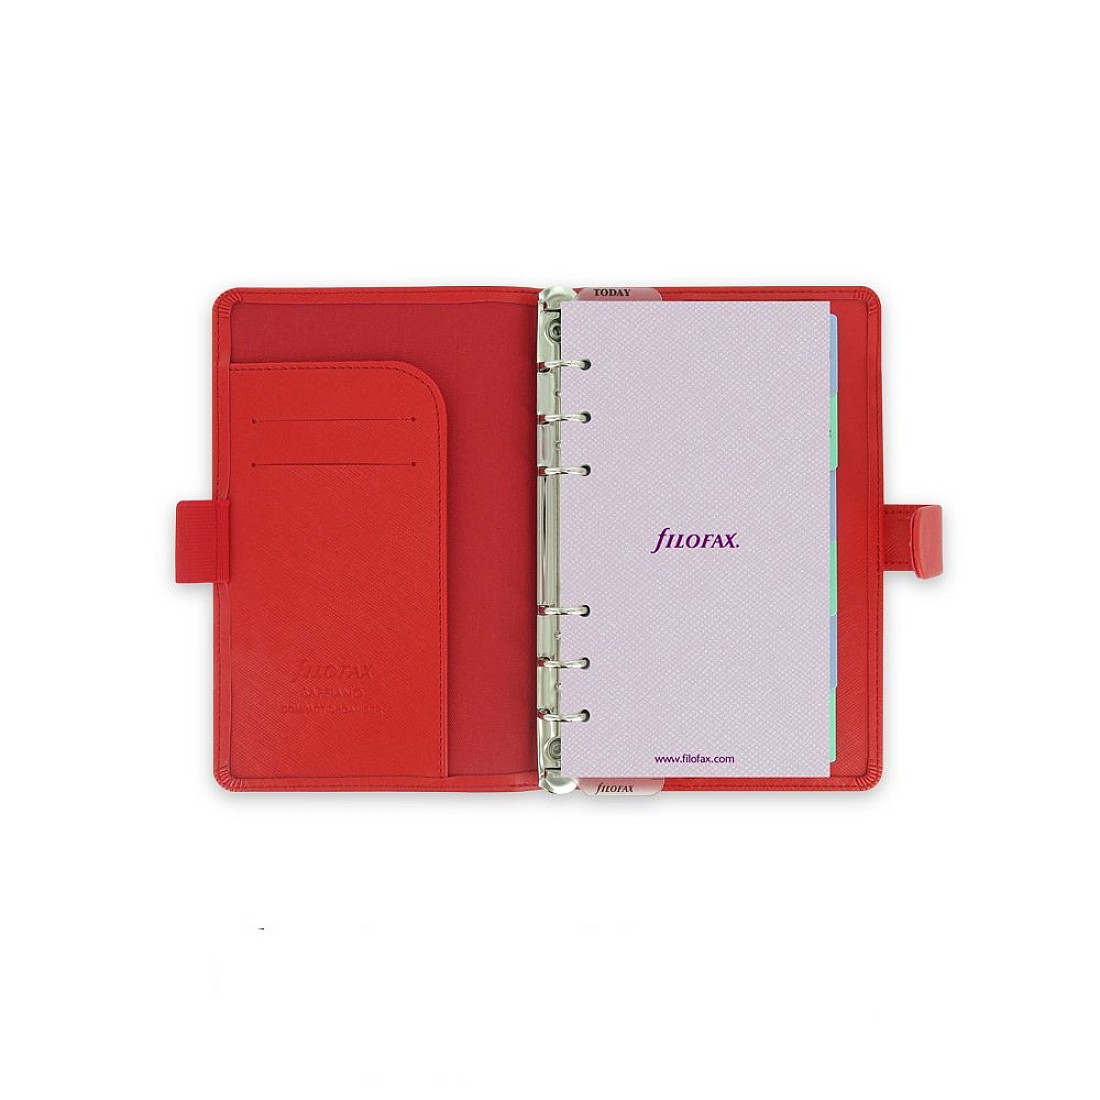 Filofax Saffiano Personal Organiser Red Leather-Look Textured Cover With Diary